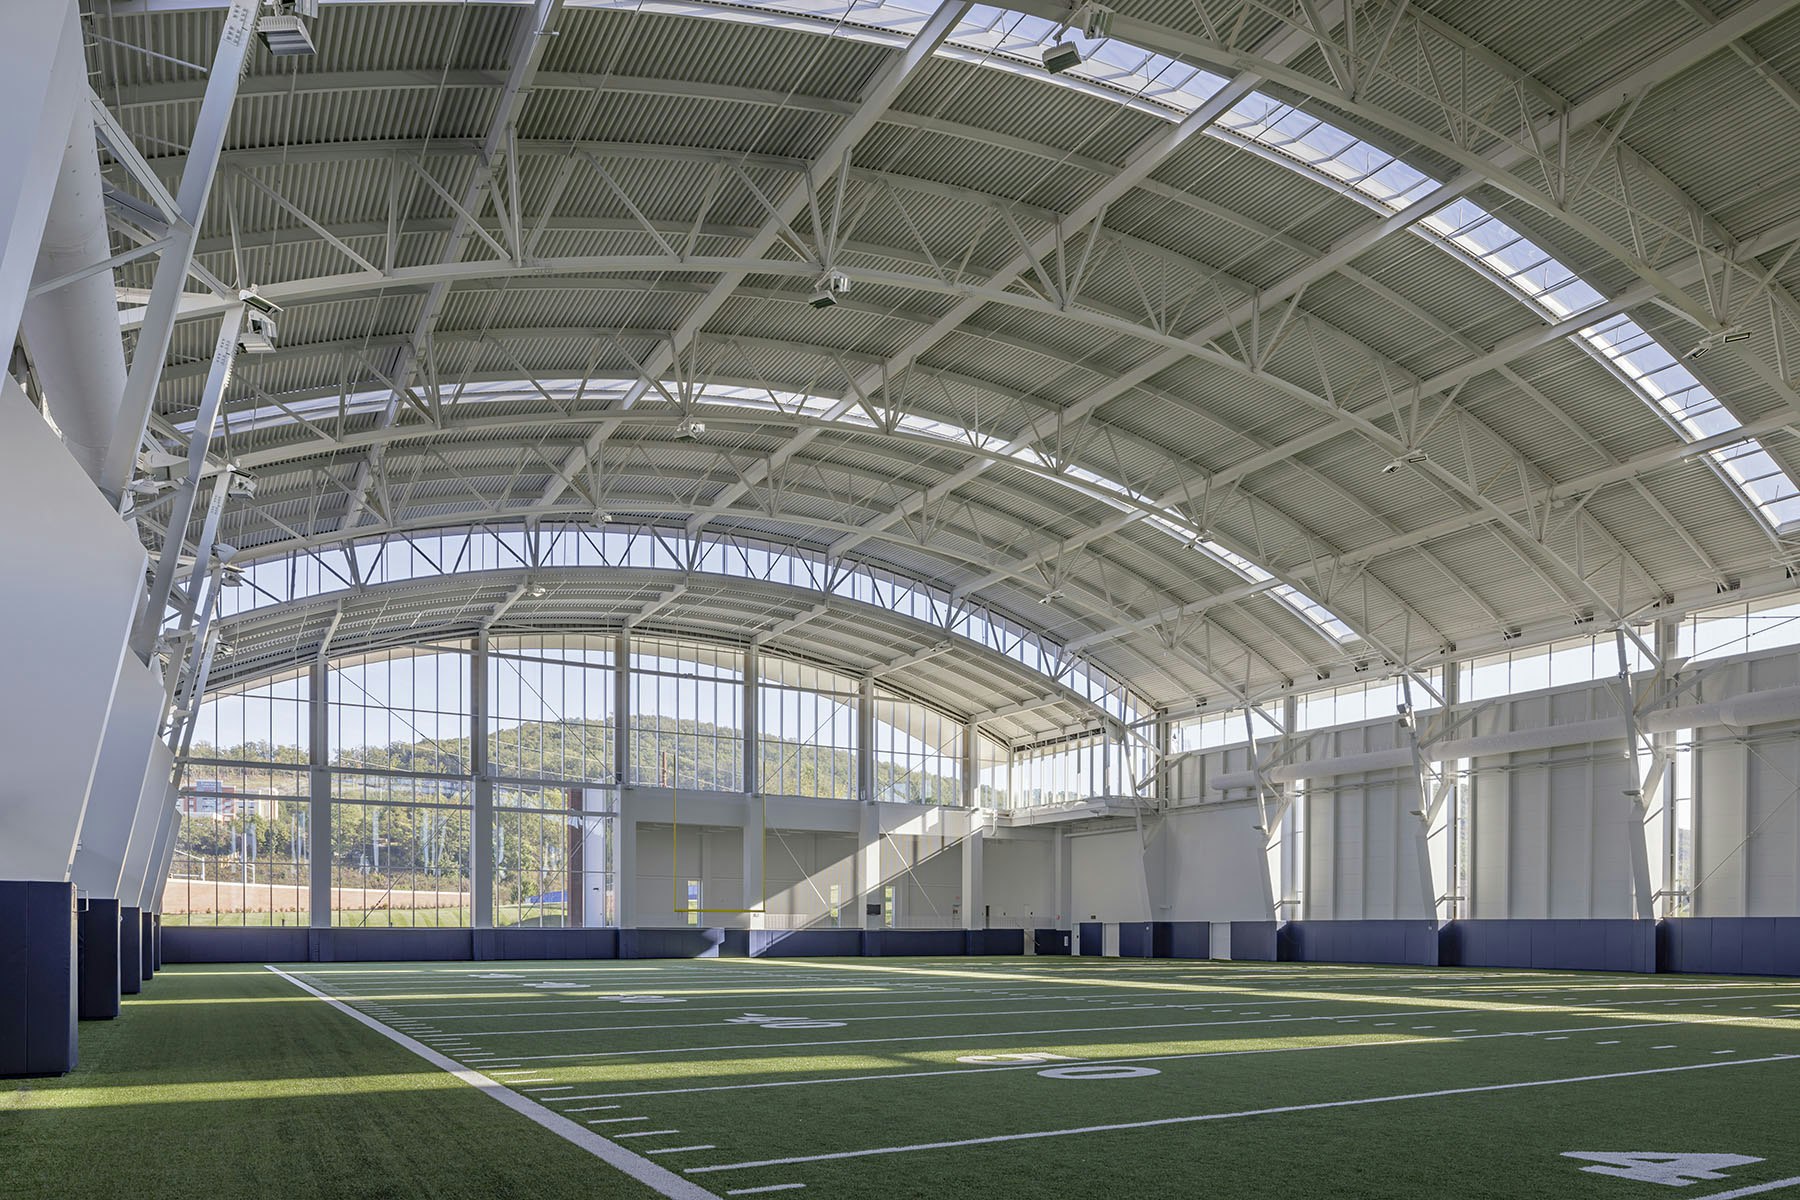 The Fieldhouse allows adequate indoor facilities for football and other field sports to practice at all times, including during periods of inclement weather.